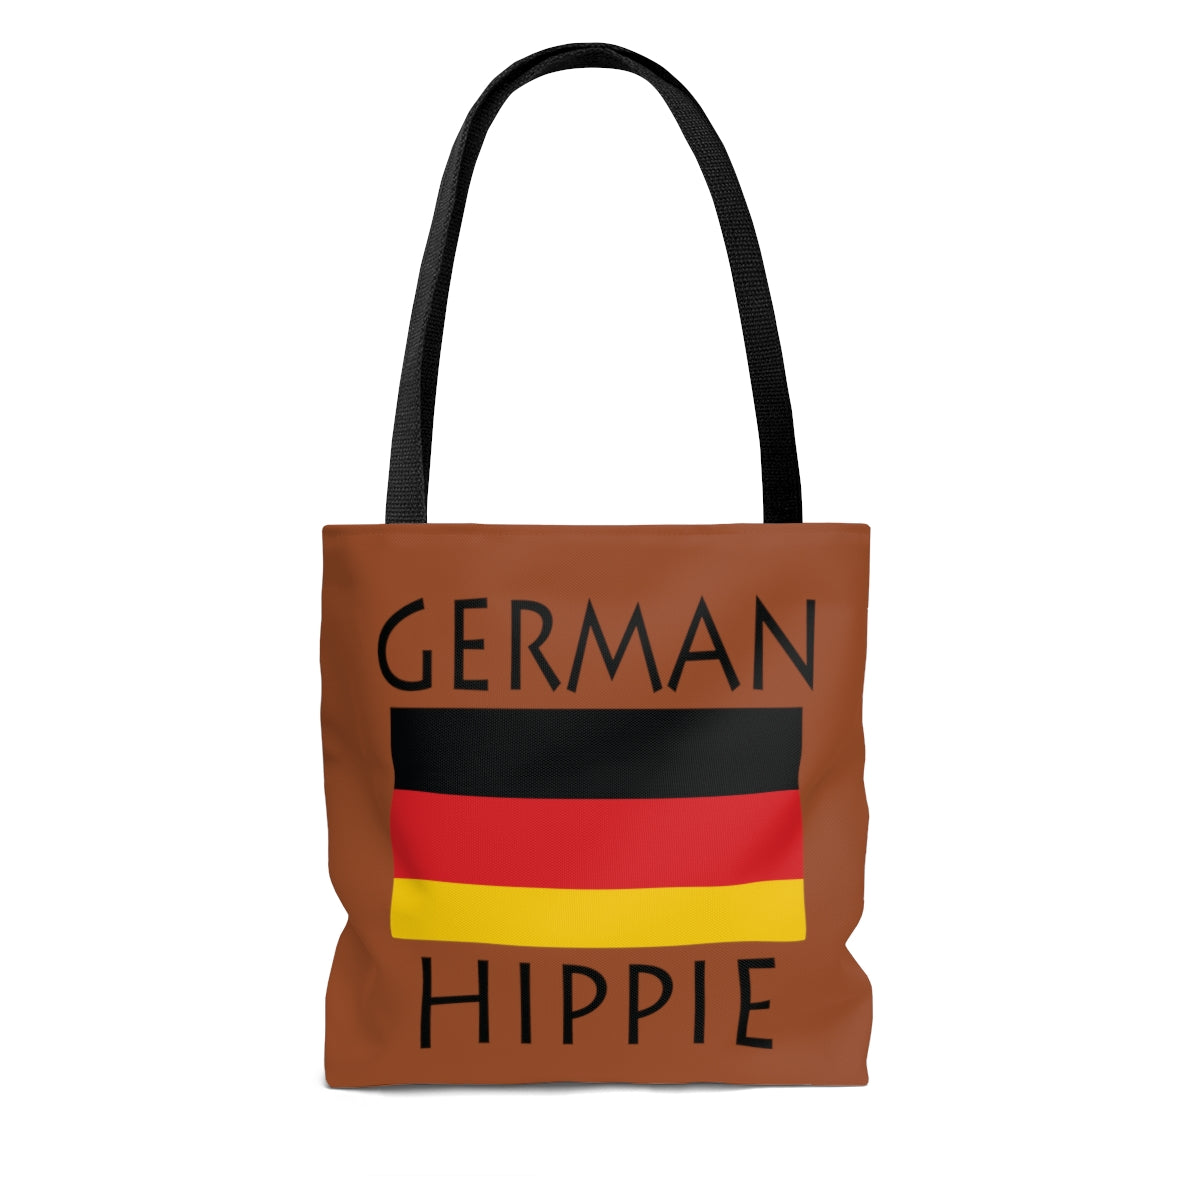 The German Flag Hippie tote is the perfect gym bag, yoga bag, Pilates bag, beach bag, shopping bag...do everything bag!  3 sizes to choose from so it is perfect for every occasion and you'll look you sharp with the perfect accessory!  The hippie vibe of caring for people & planet is alive in every Stately Wear tote!  Also available from Katie Couric Shop.